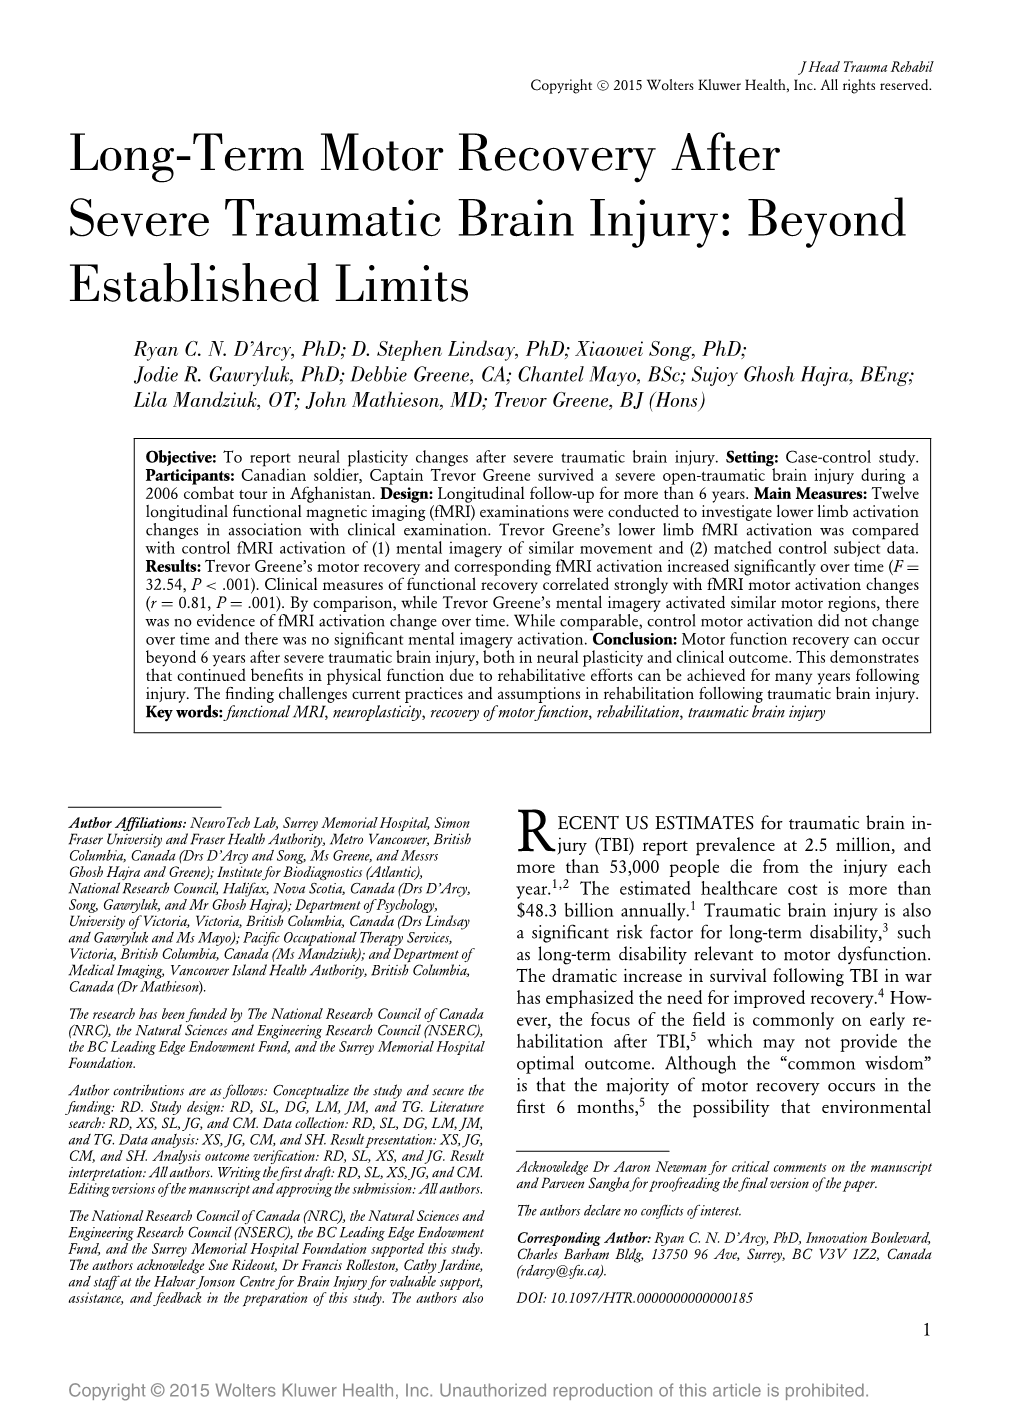 Long-Term Motor Recovery After Severe Traumatic Brain Injury: Beyond Established Limits